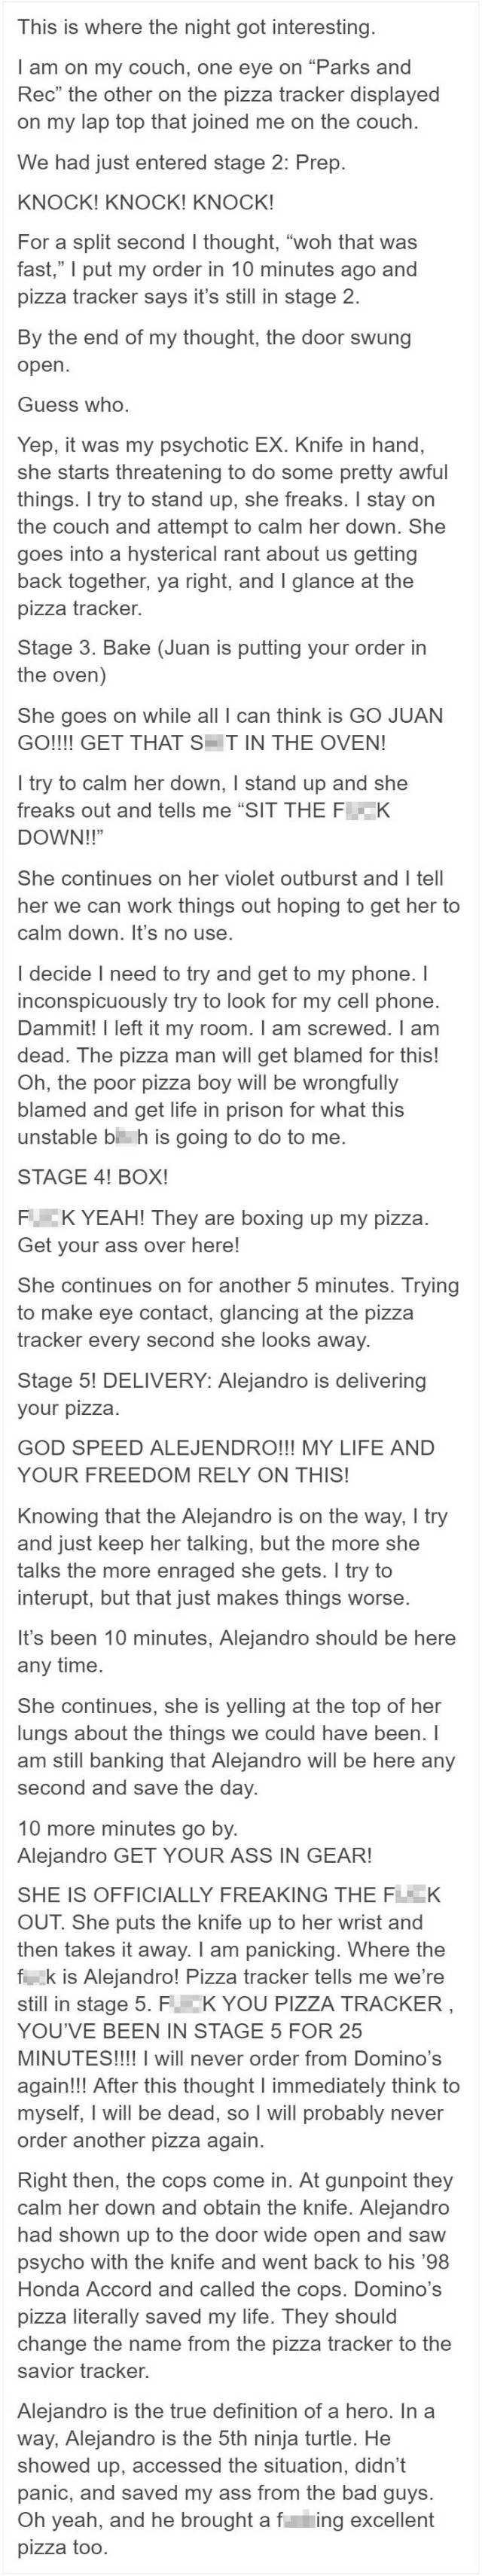 Pizza Can Save Your Life!